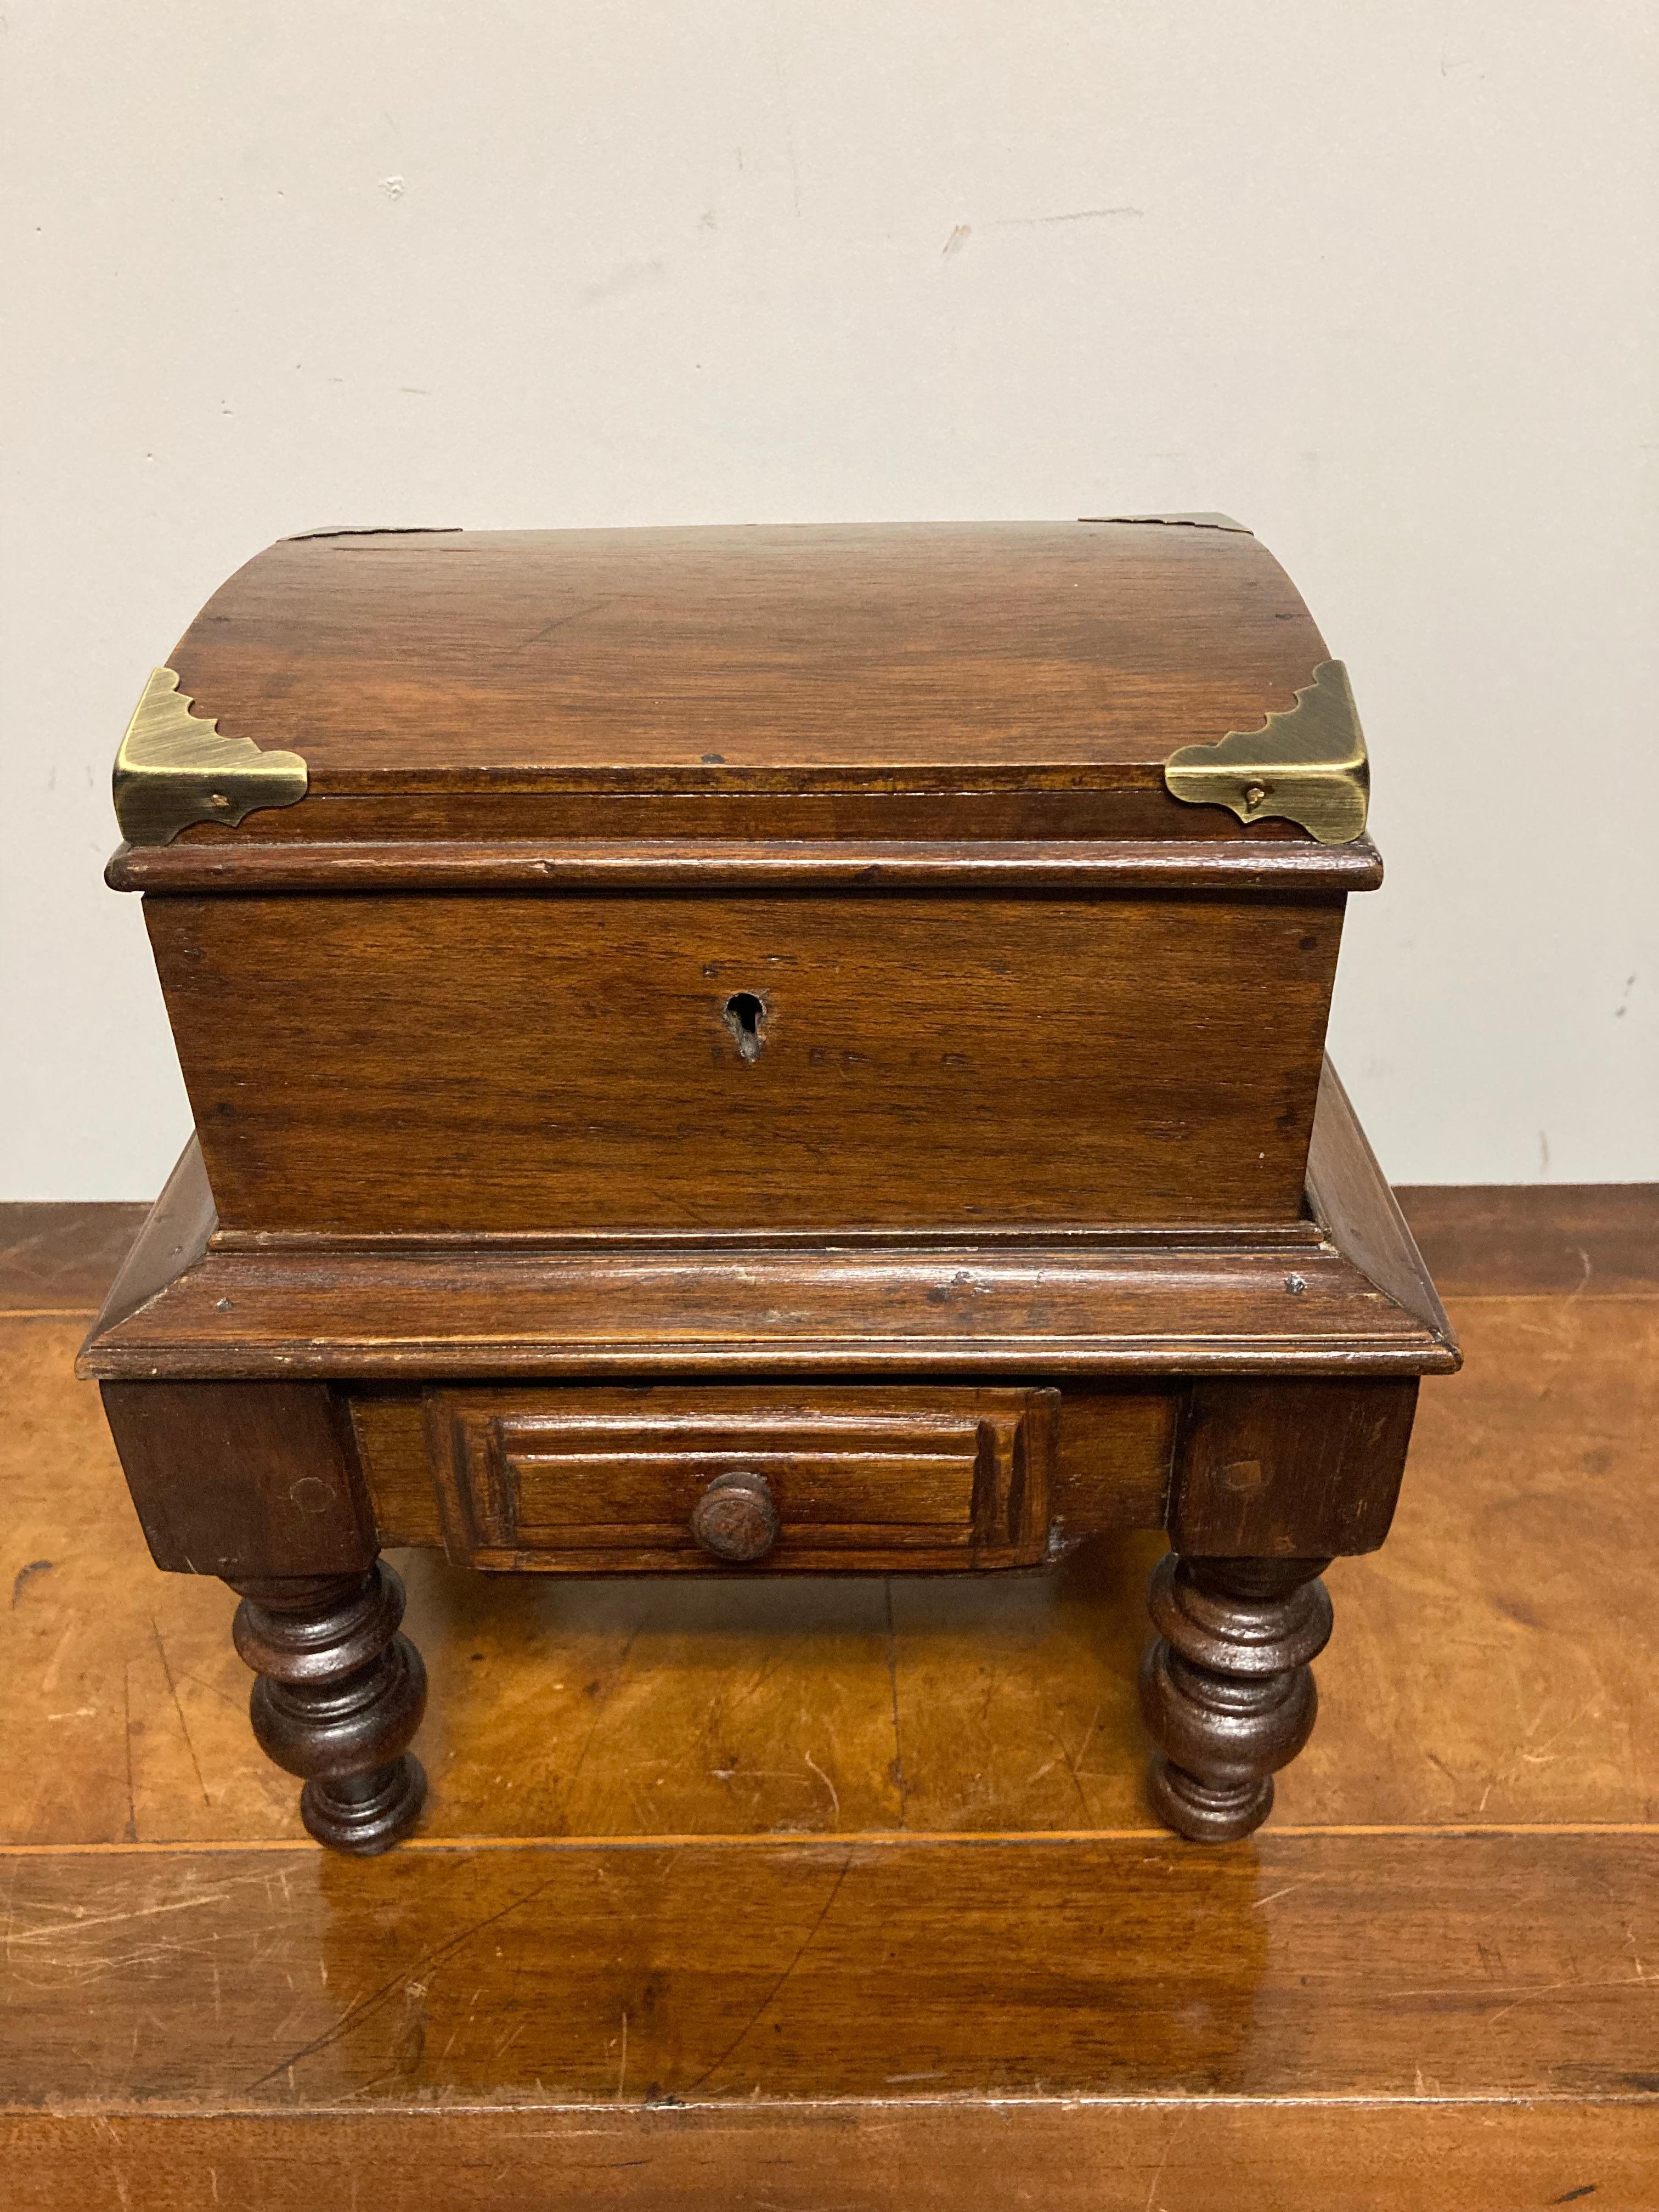 A sweet little box on stand from the Edwardian period. The box, likely originally a tea caddy, with brass corners. The base with turned legs and a single drawer. The box lifts out of the base. 
Measures: 10.75 inches high 9.5 wide 7 deep.